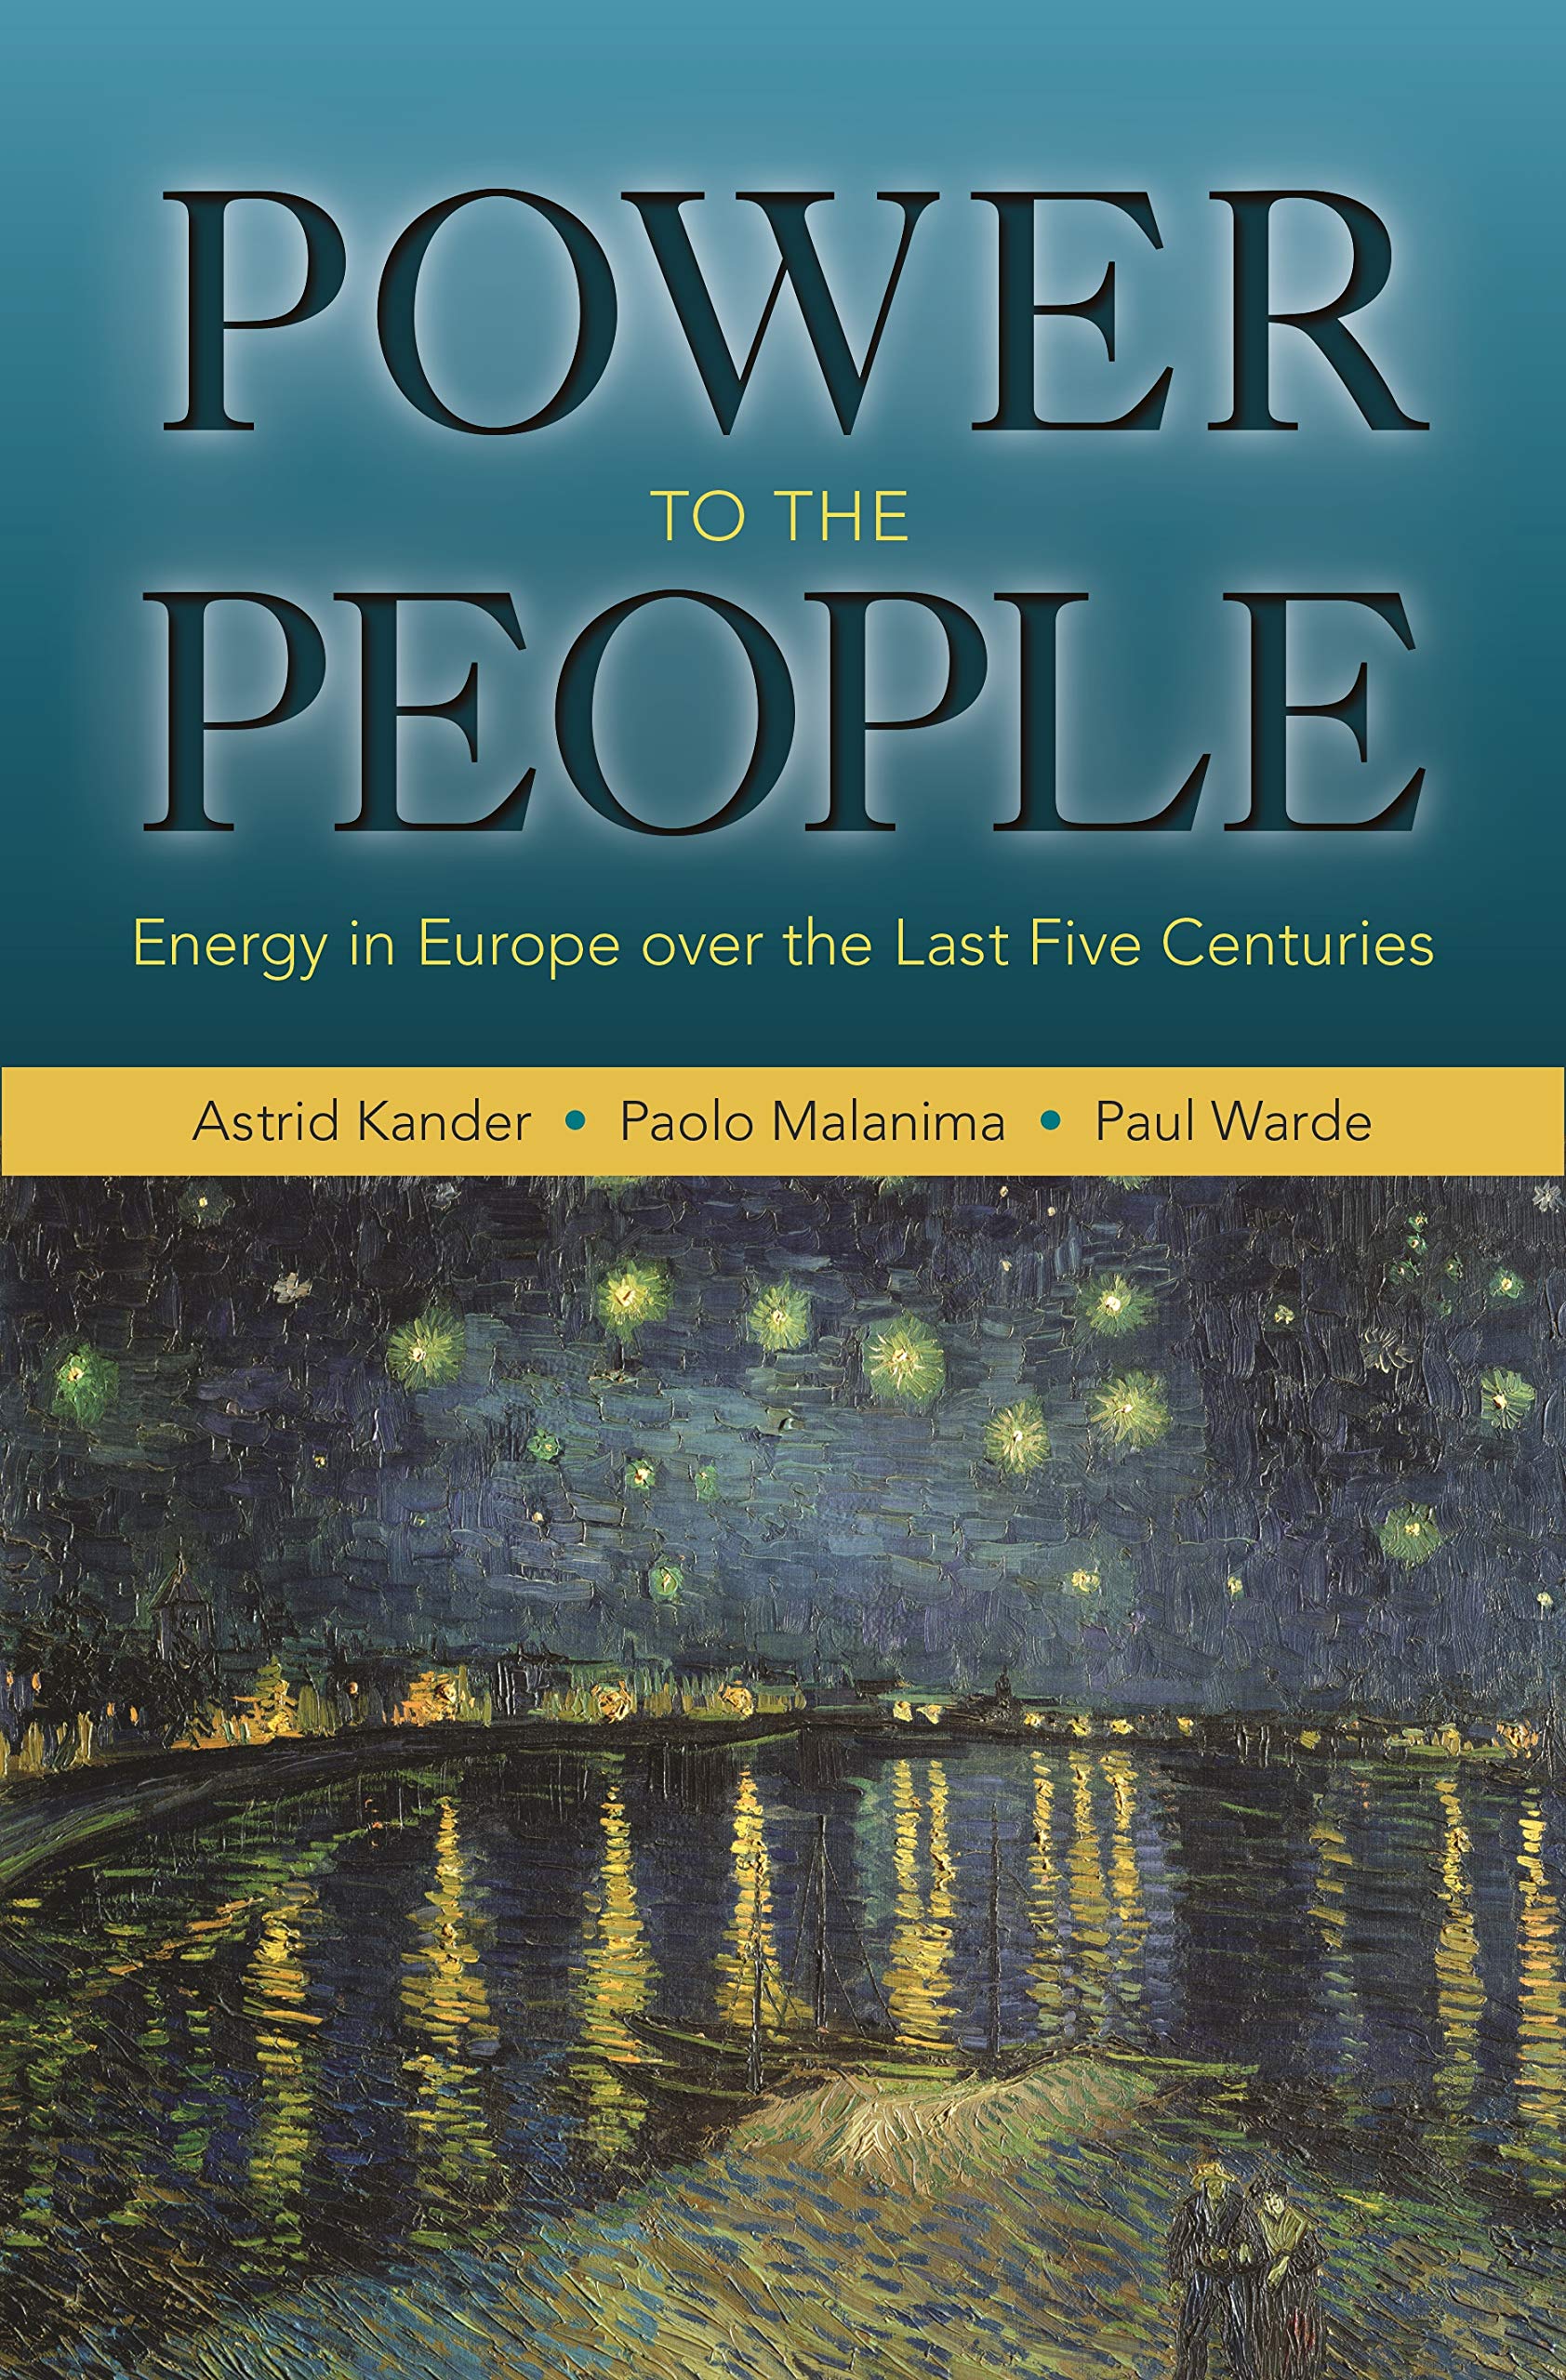 Power to the People: Energy in Europe over the Last Five Centuries (The Princeton Economic History of the Western World Book 46)